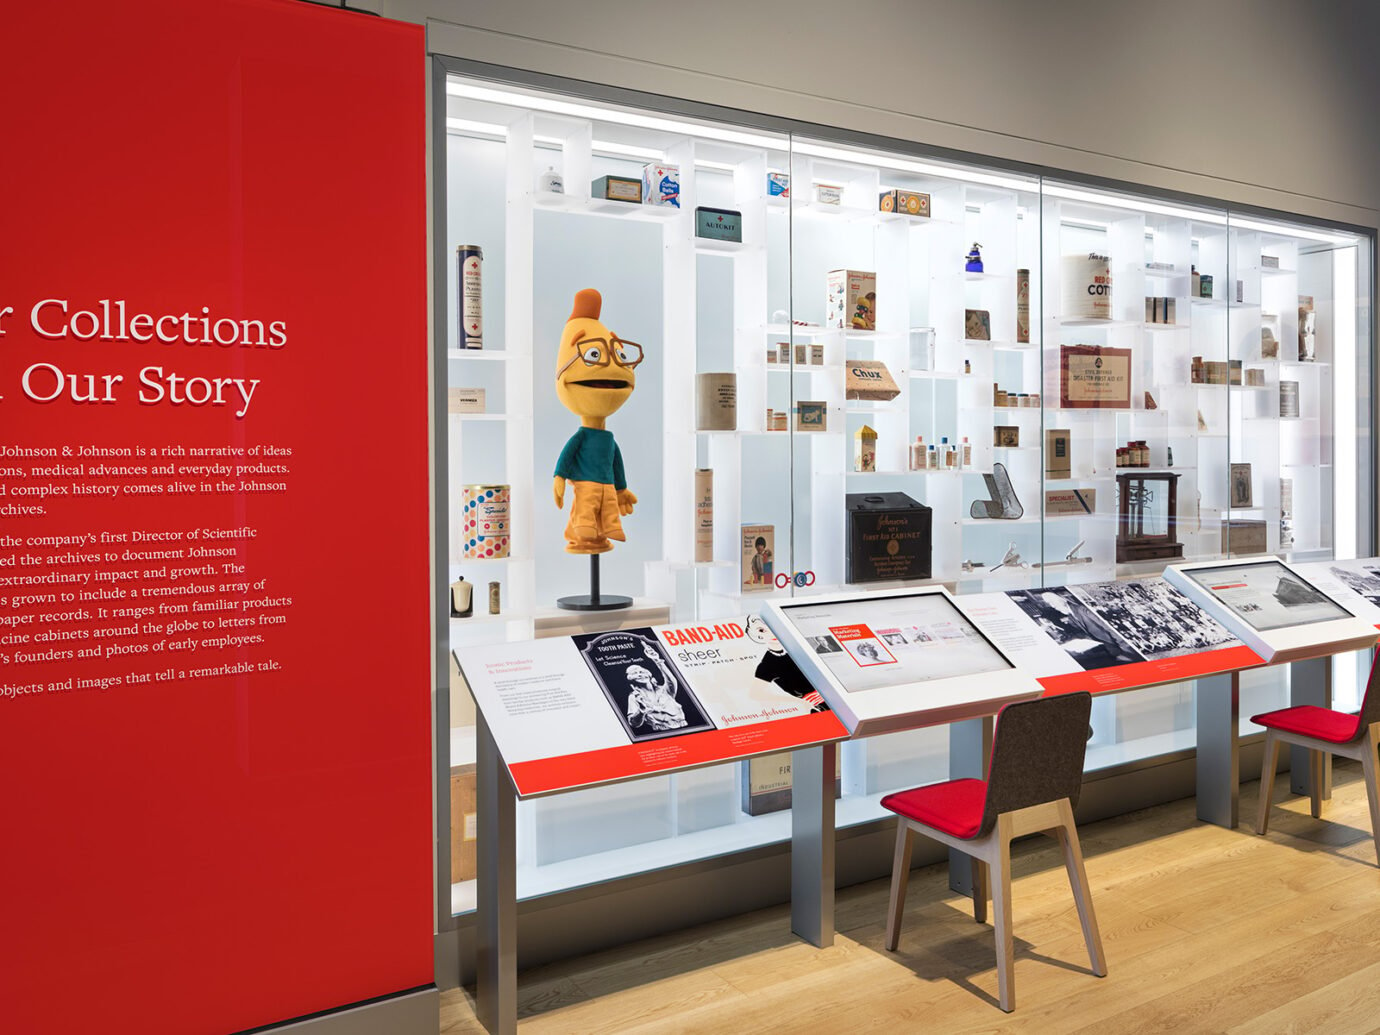 Our collections tell a story gallery